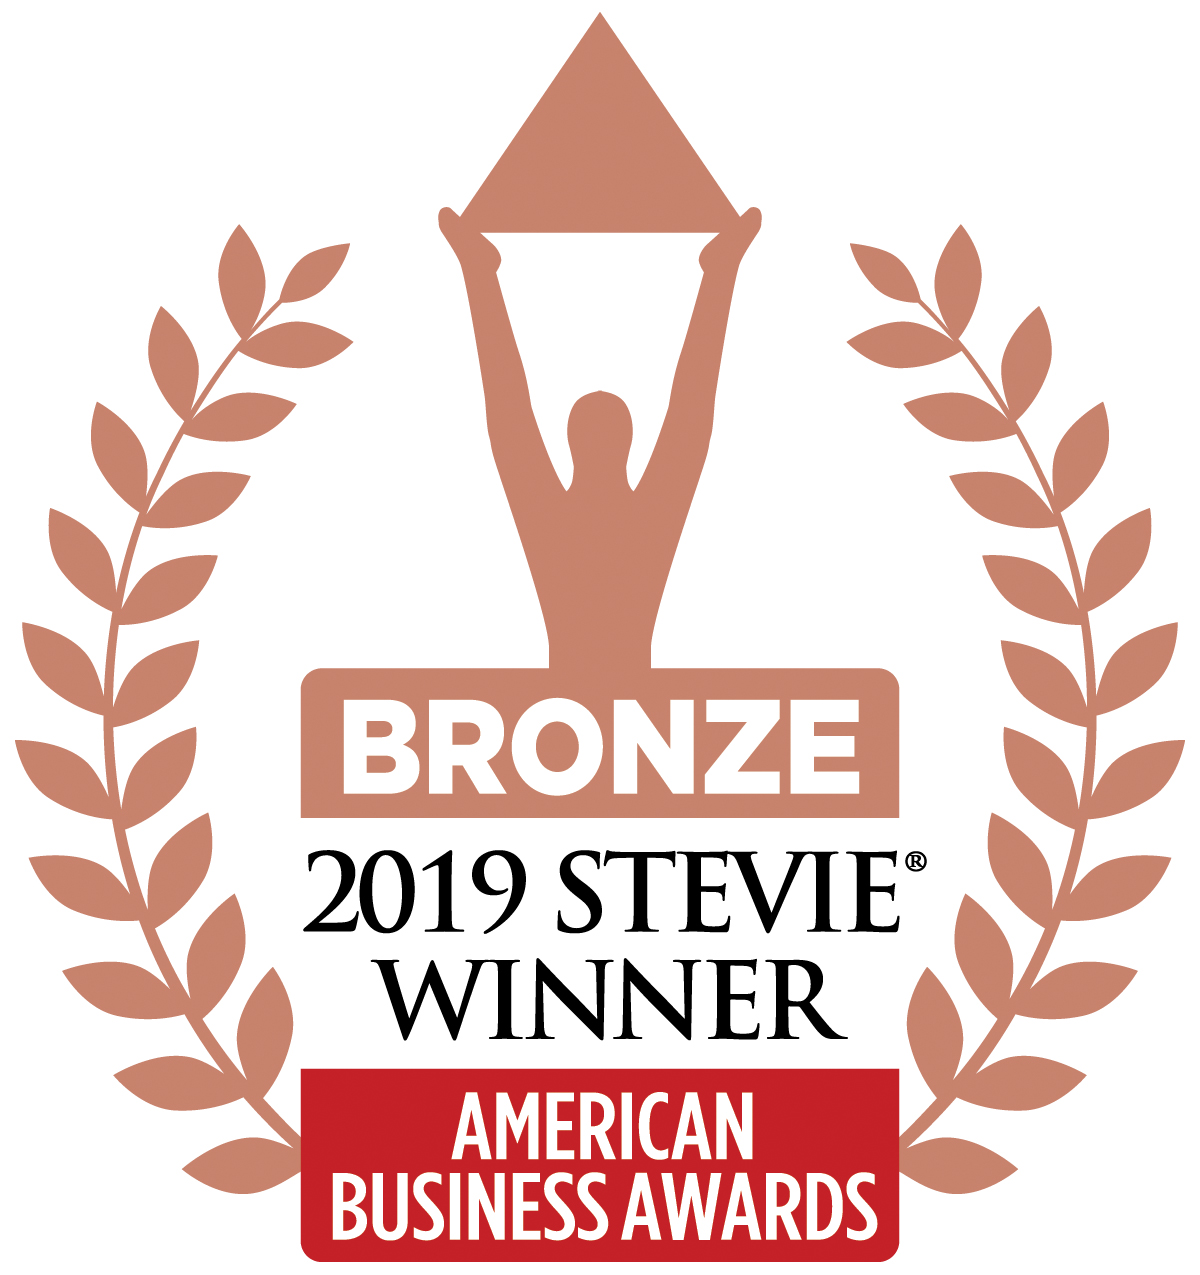 THE AMERICAN BUSINESS AWARDS - 2019 BRONZE STEVIE